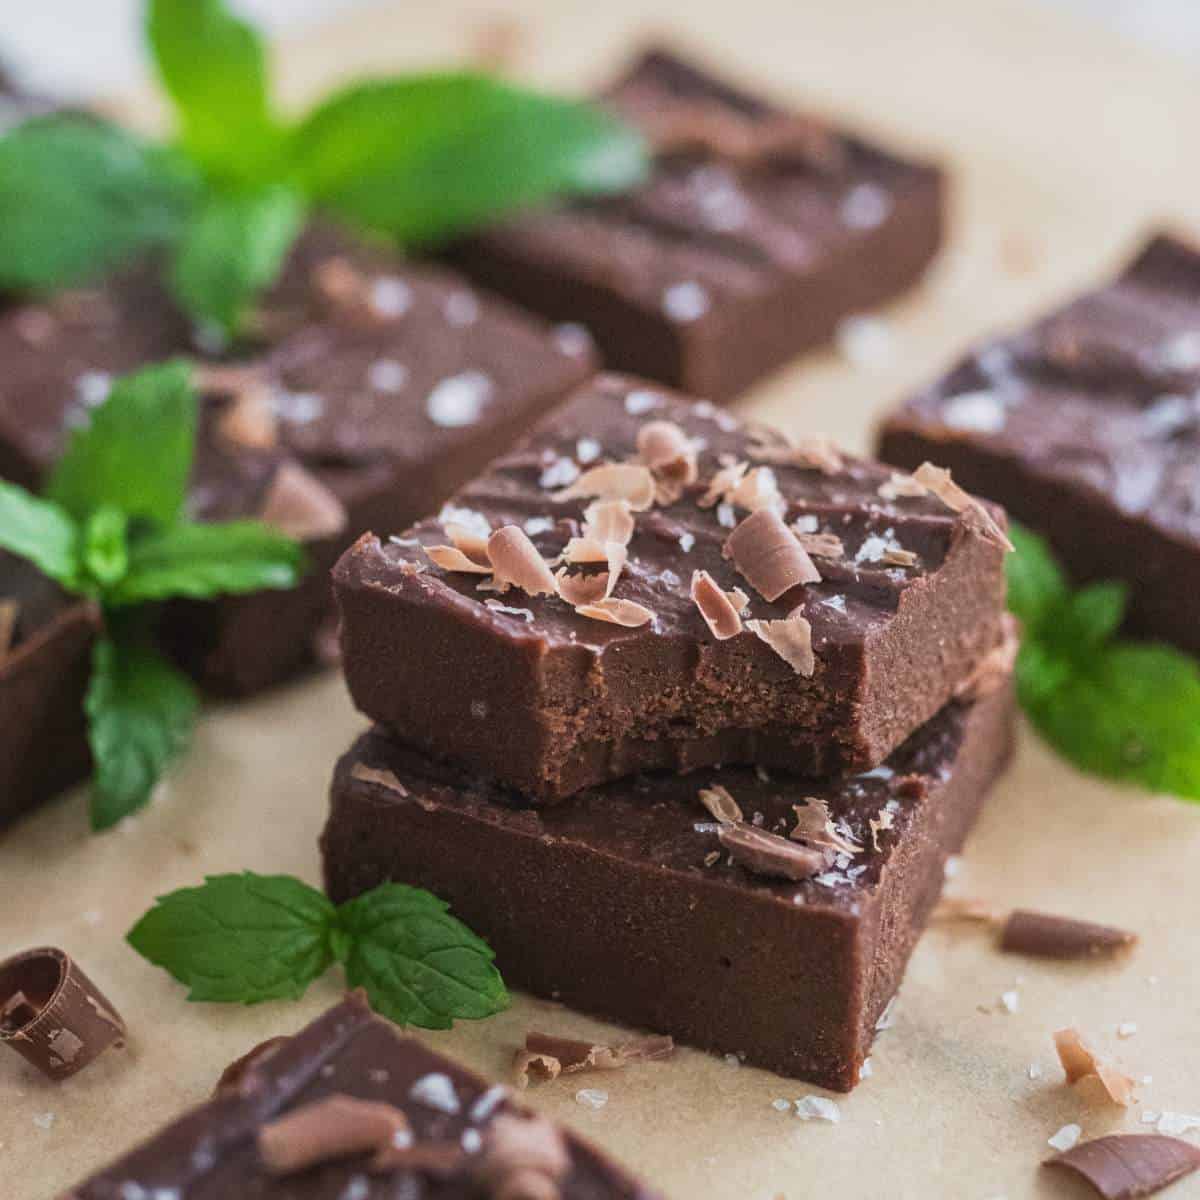 Two healthy fudge bars with chocolate and salt garnish, stacked on top of each other on a baking sheet full of bars and peppermint leaves.